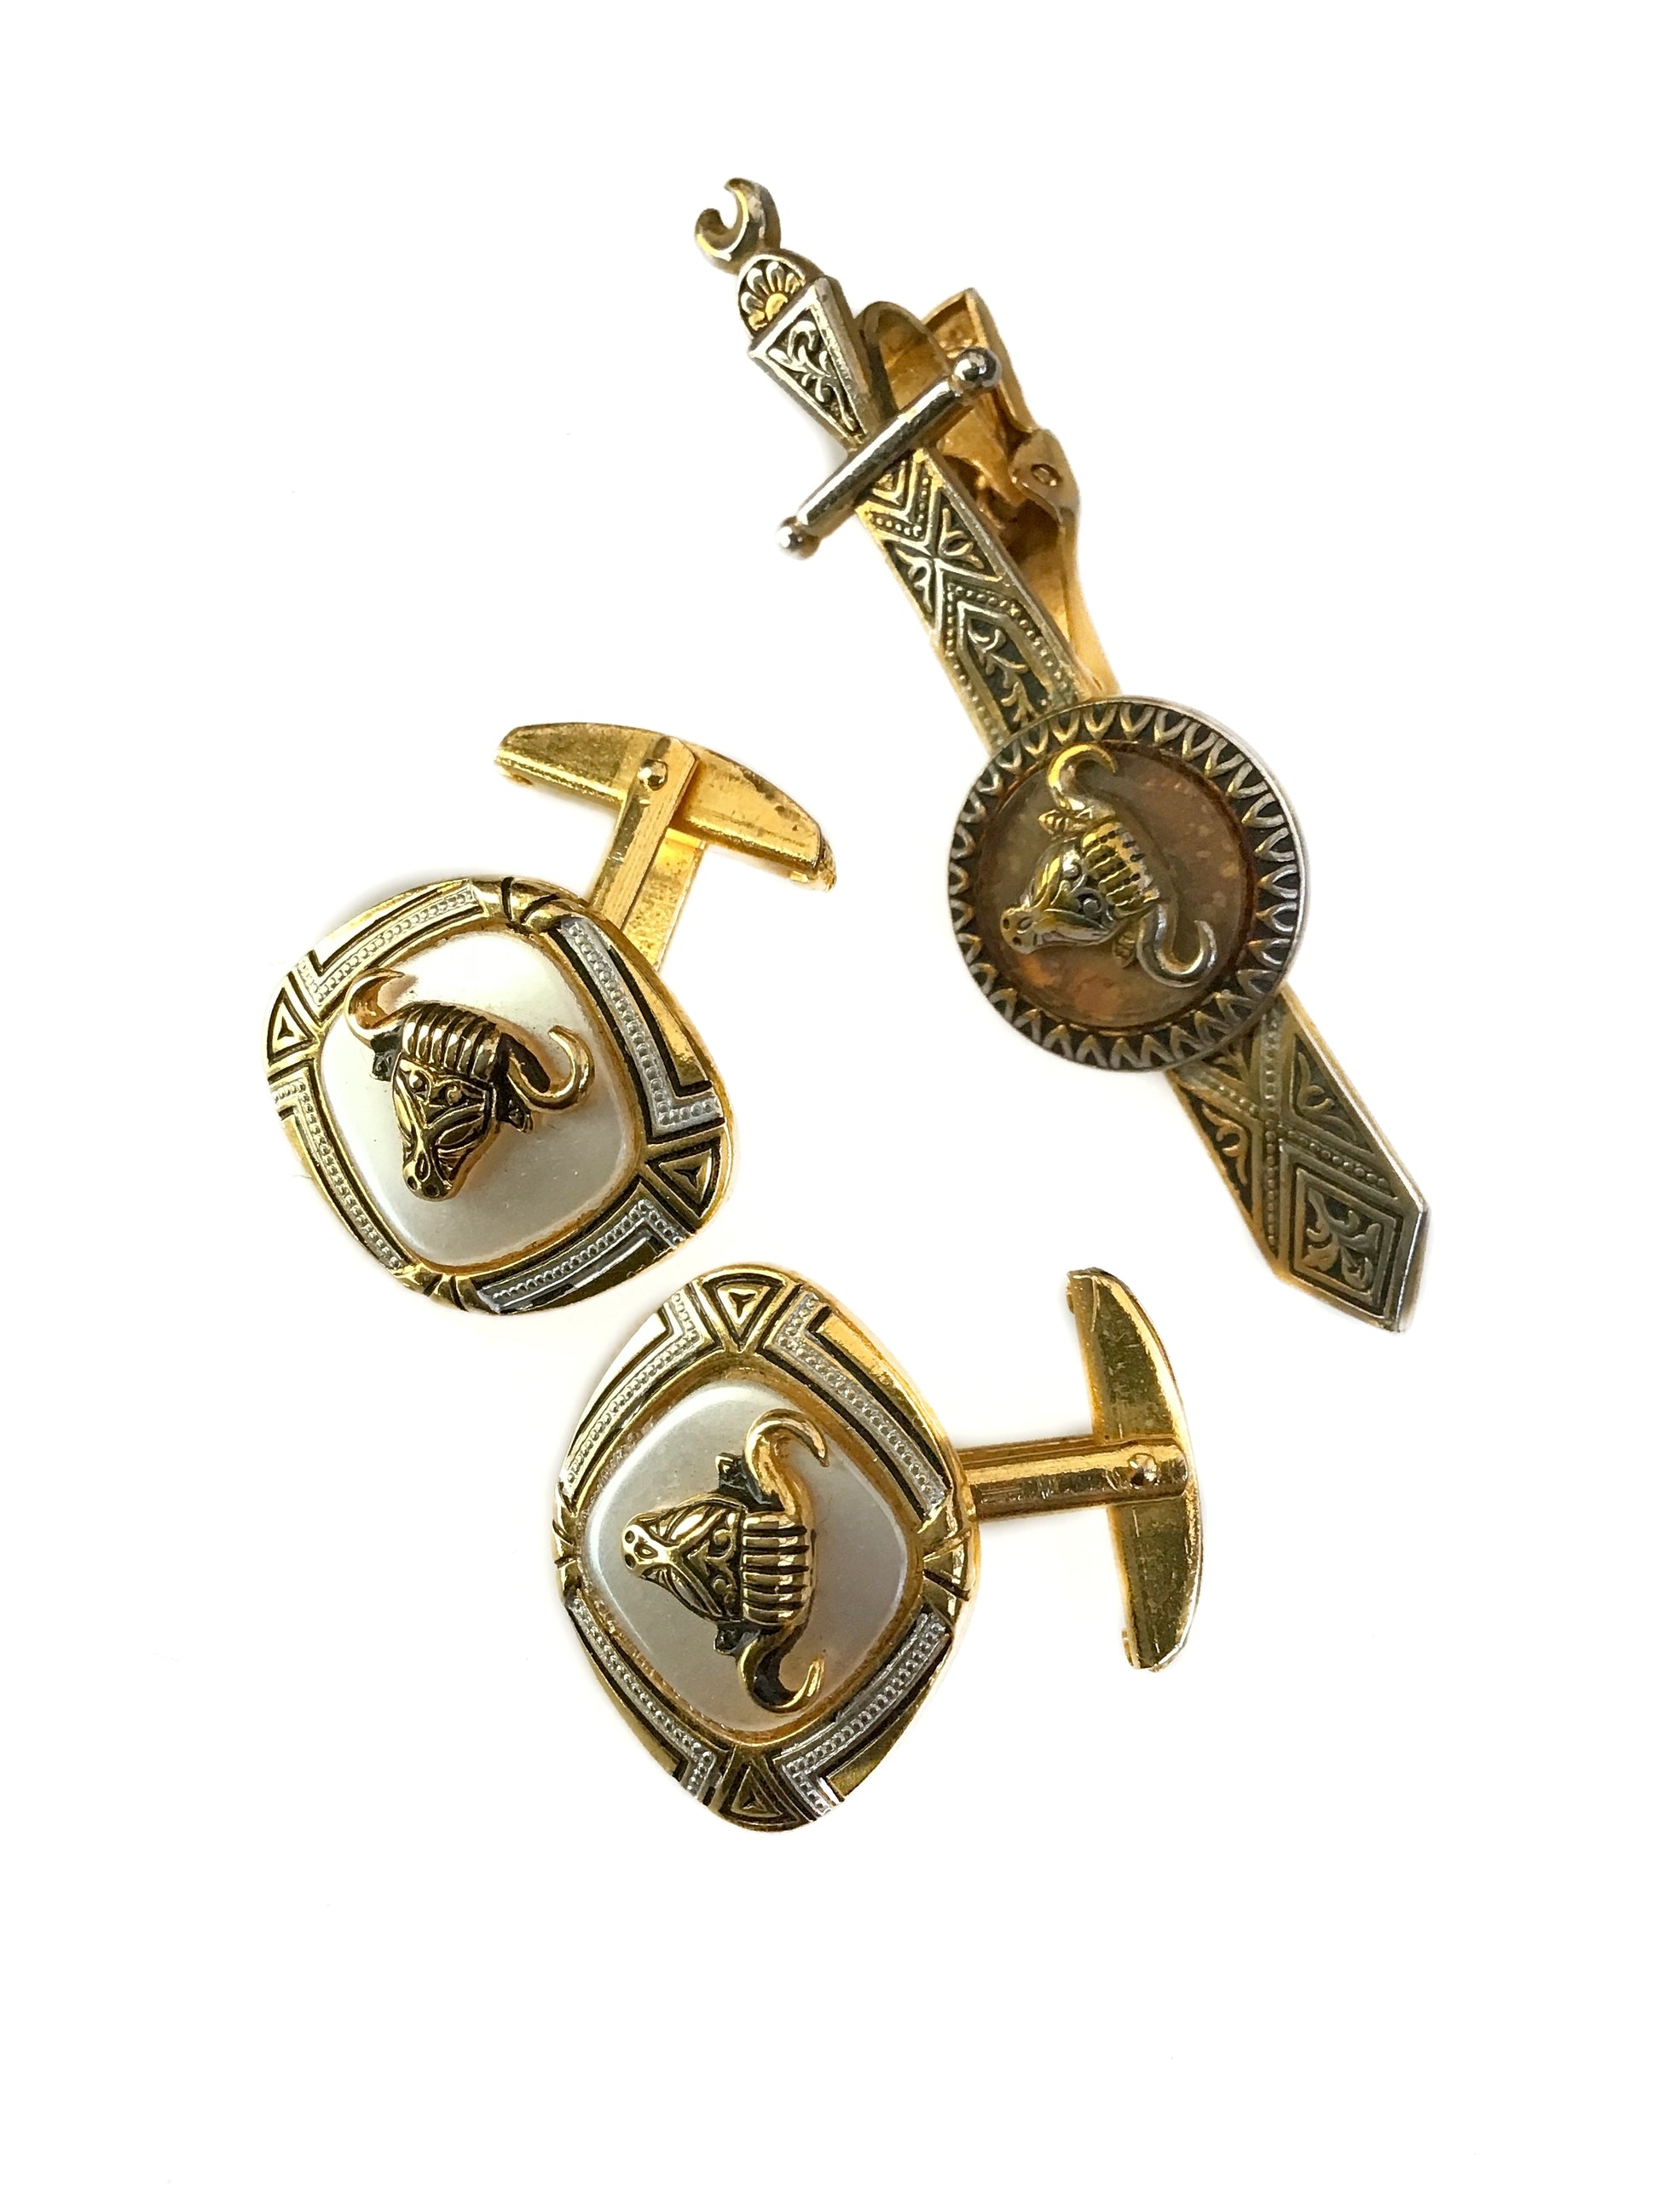 vintage midcentury toledo damascene cufflinks and tie clip set, with moonstone, gold plated